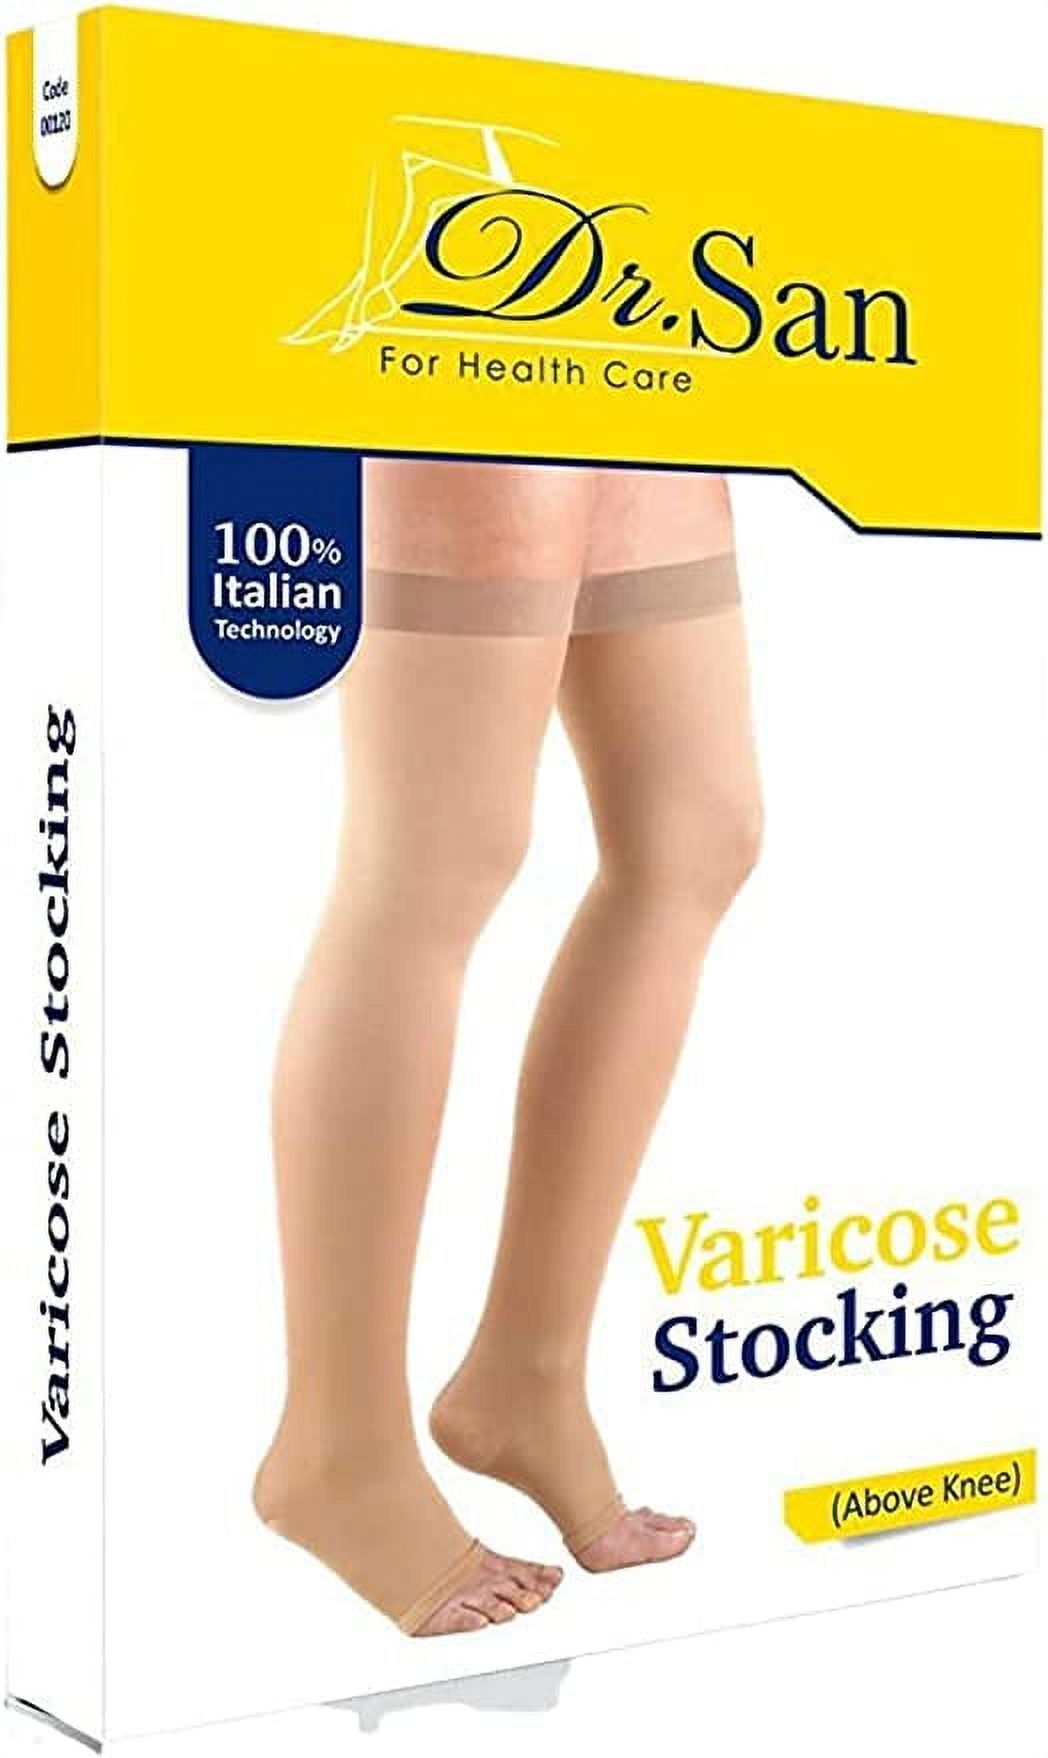 Dr. San Knee High Compression Socks 20-30mmHg Firm Support, Opaque